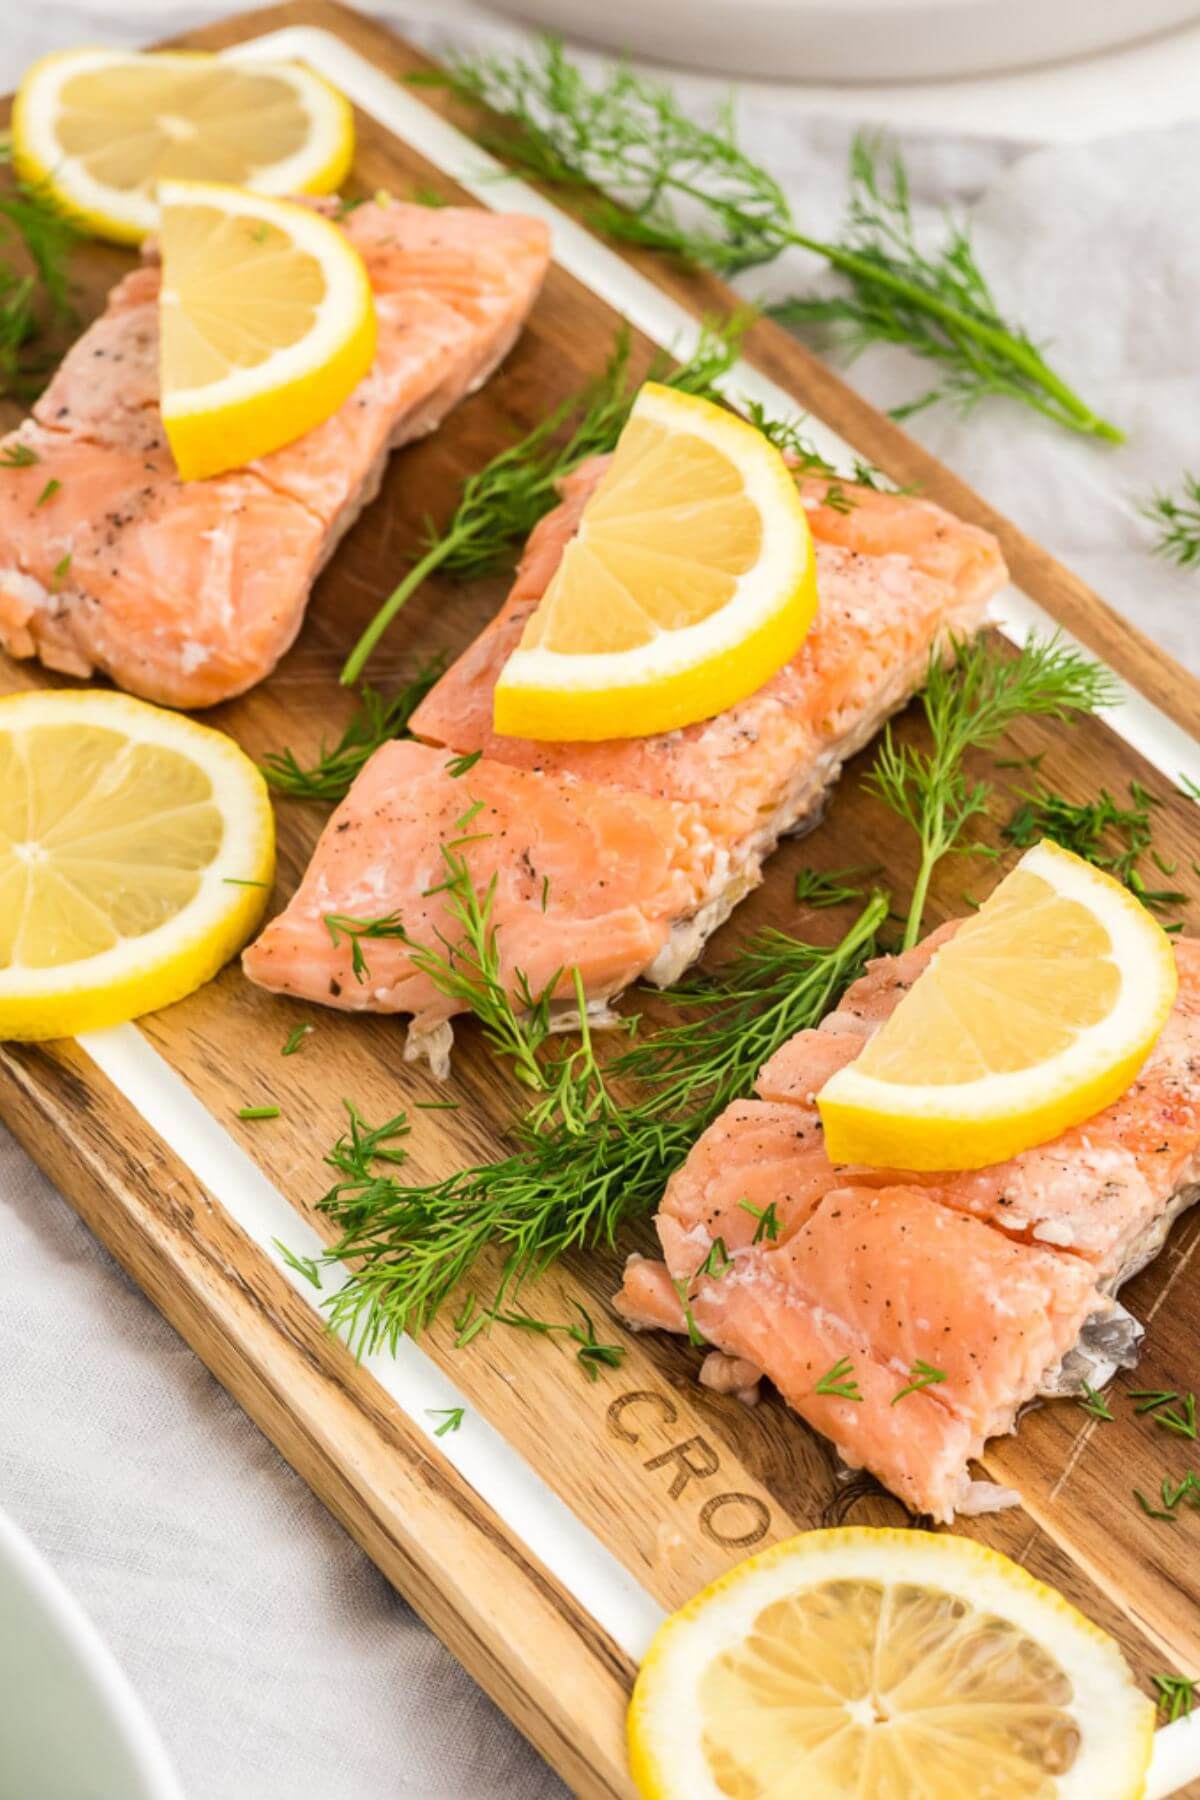 Cooked salmon pieces are topped with lemon slices on cut board with fresh dill.